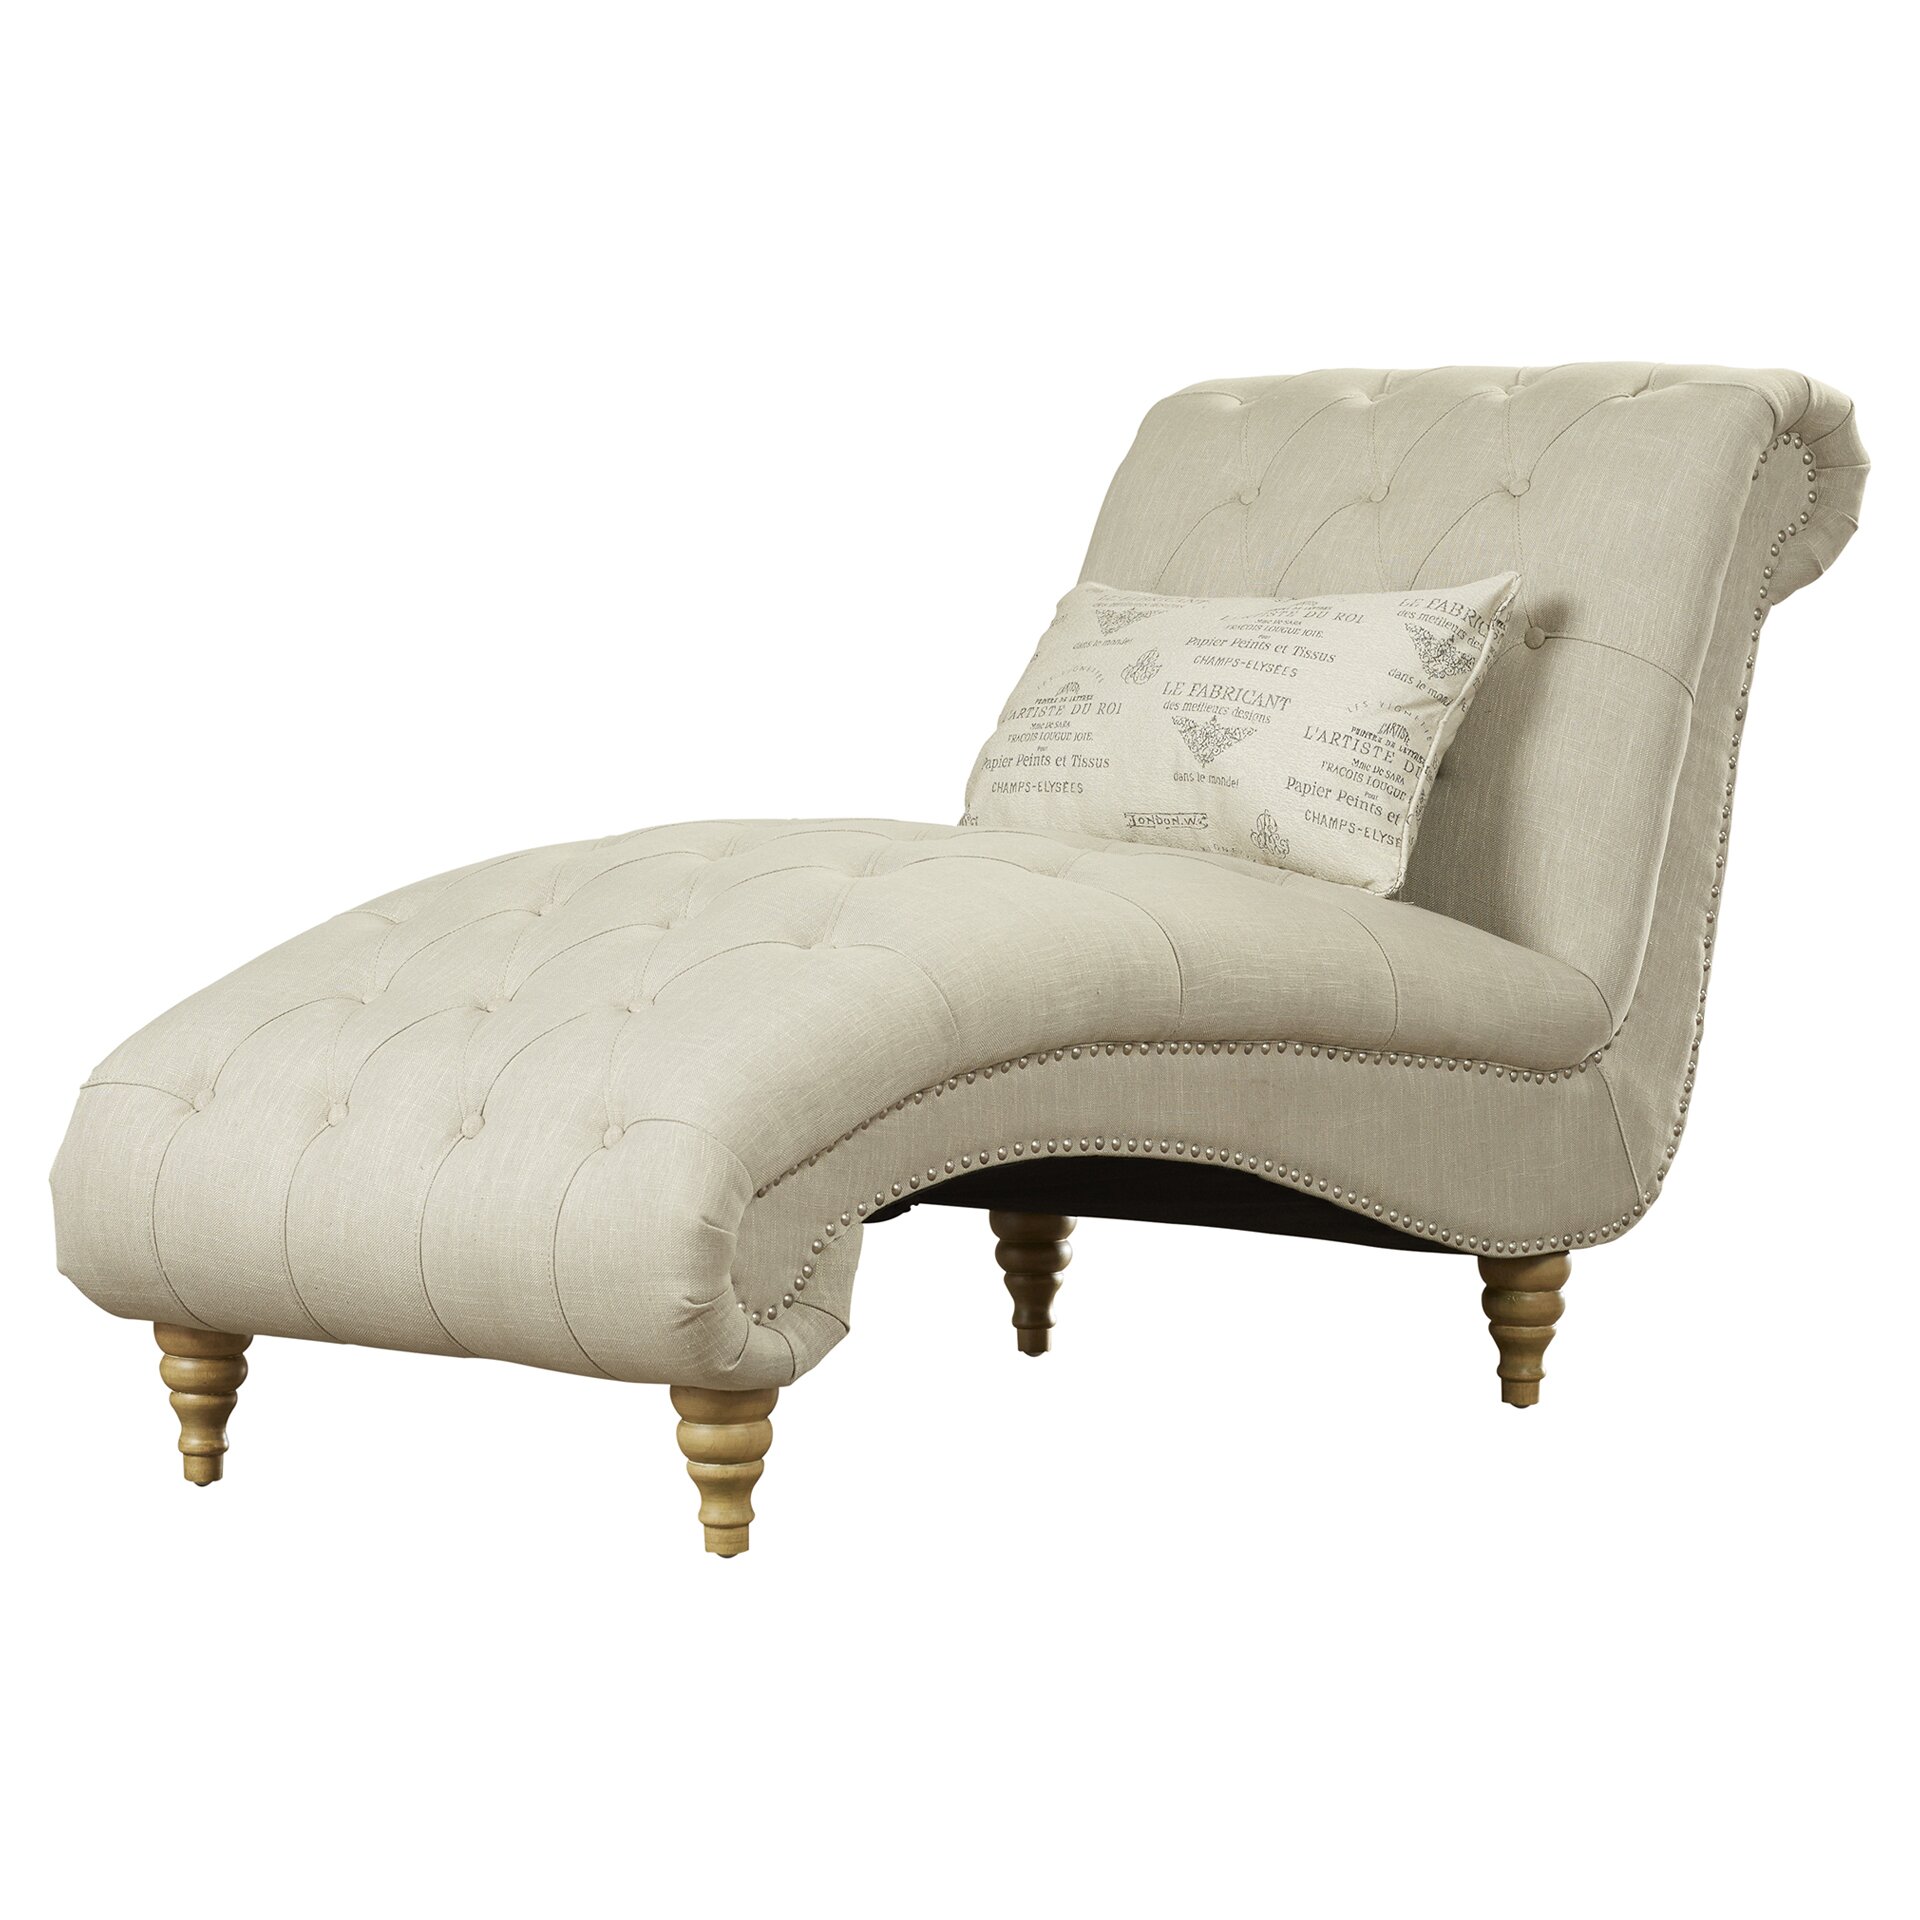 Lark Manor Versailles Living Room Chaise Lounge & Reviews 